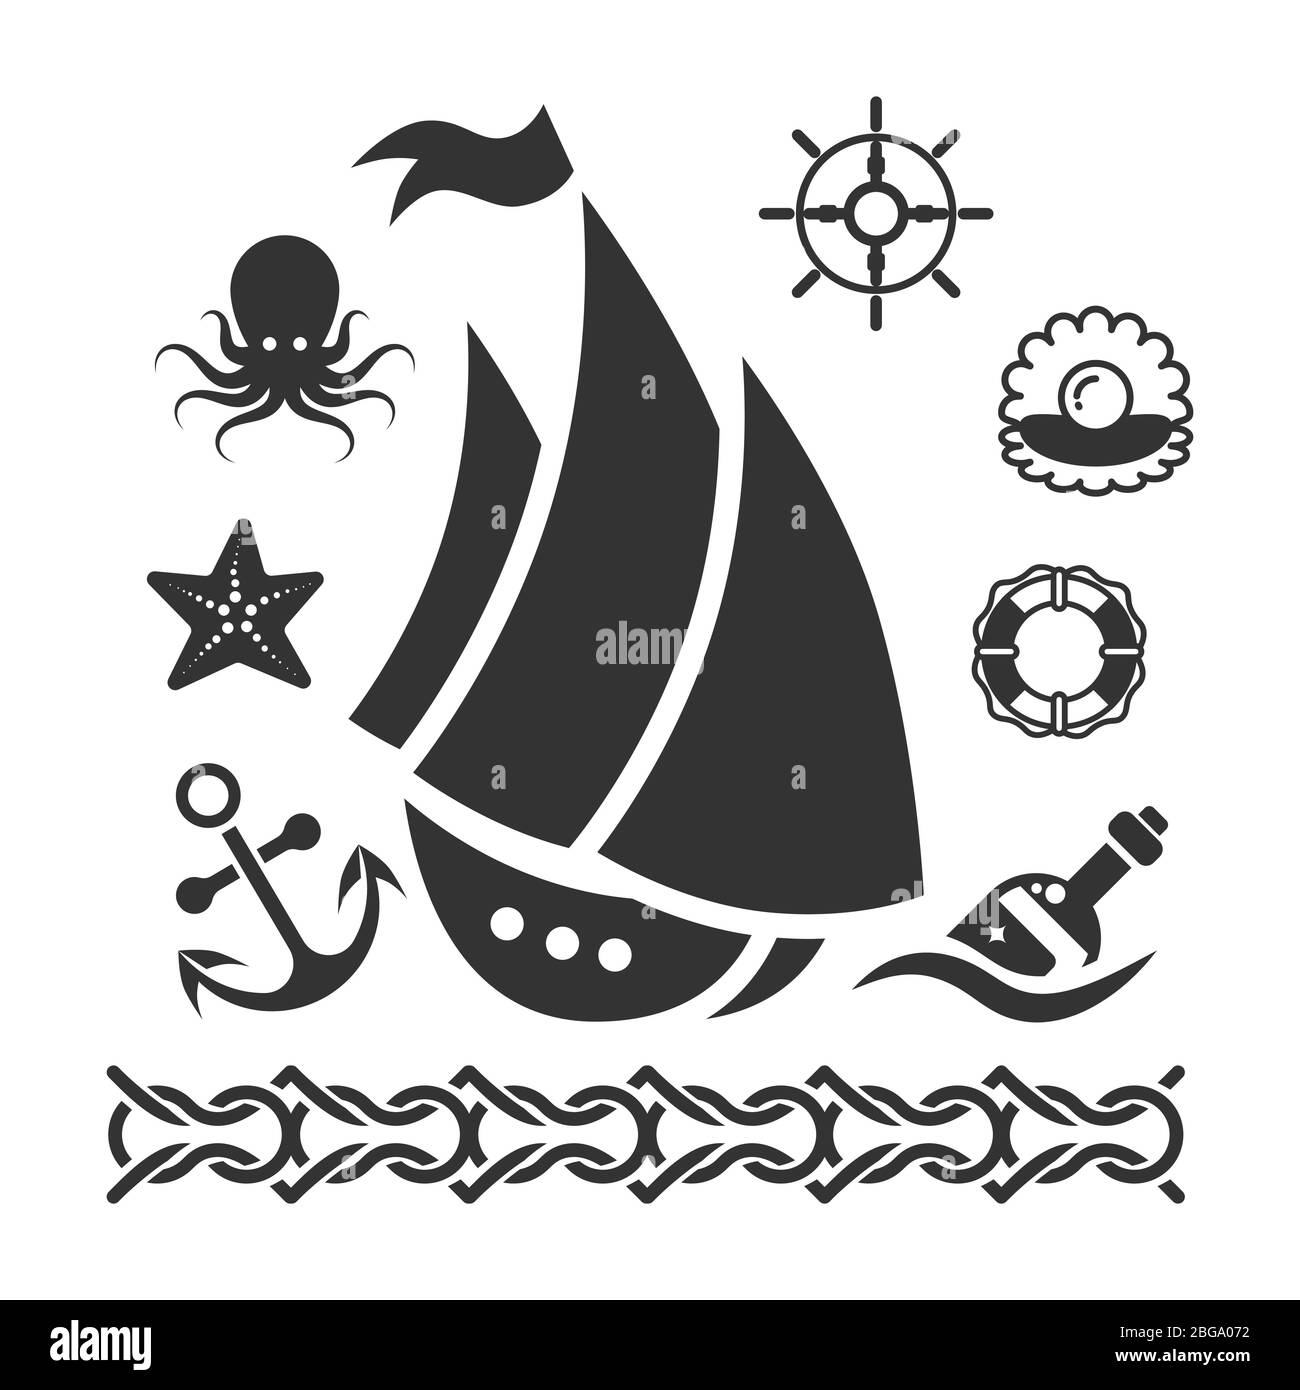 Vintage marine icons set with ship starfish anchor handwheel isolated on white background. Vector illustration Stock Vector